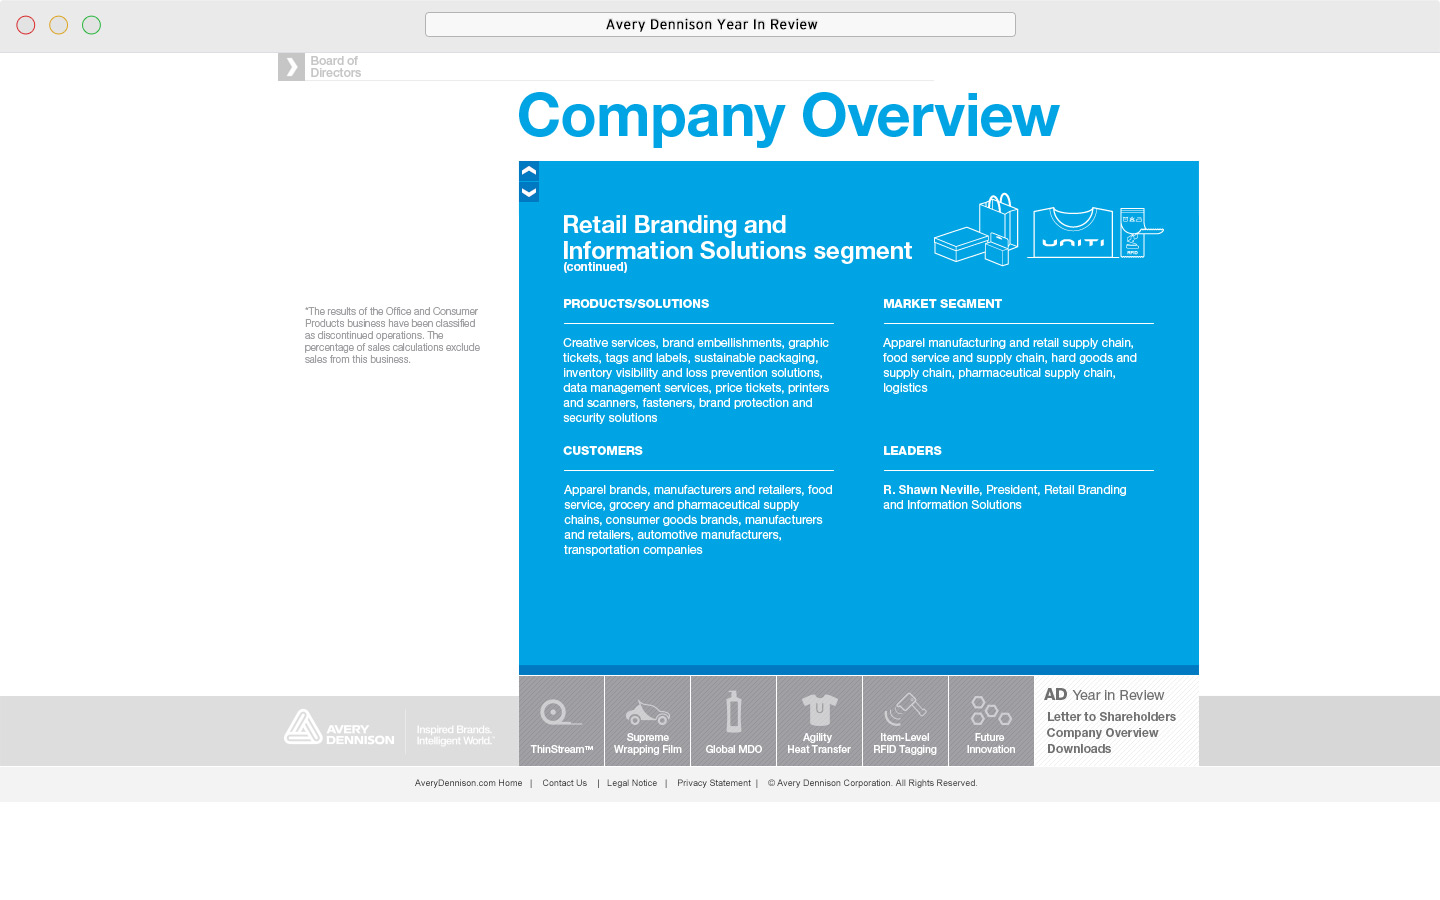 Avery Dennison 2011 Online Year In Review Company Overview